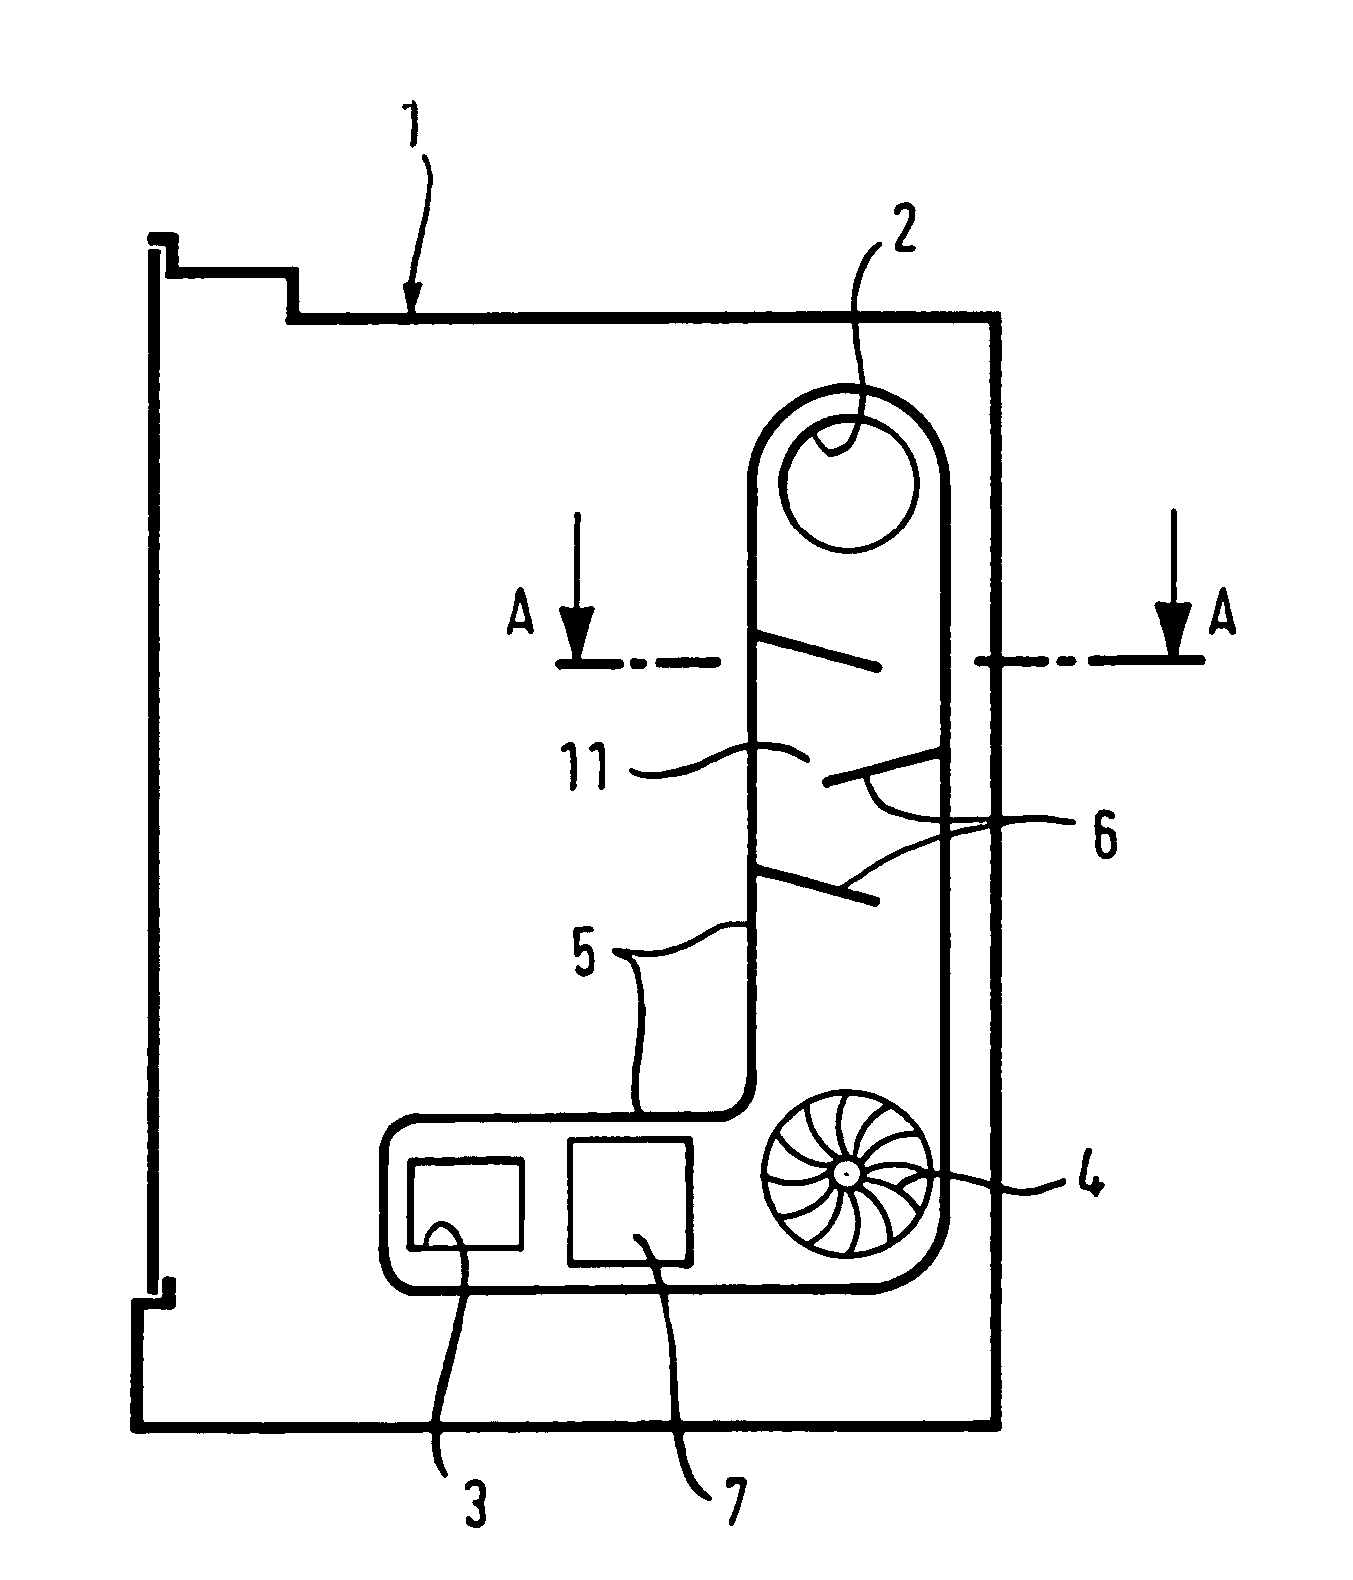 Dishwasher comprising a drying apparatus